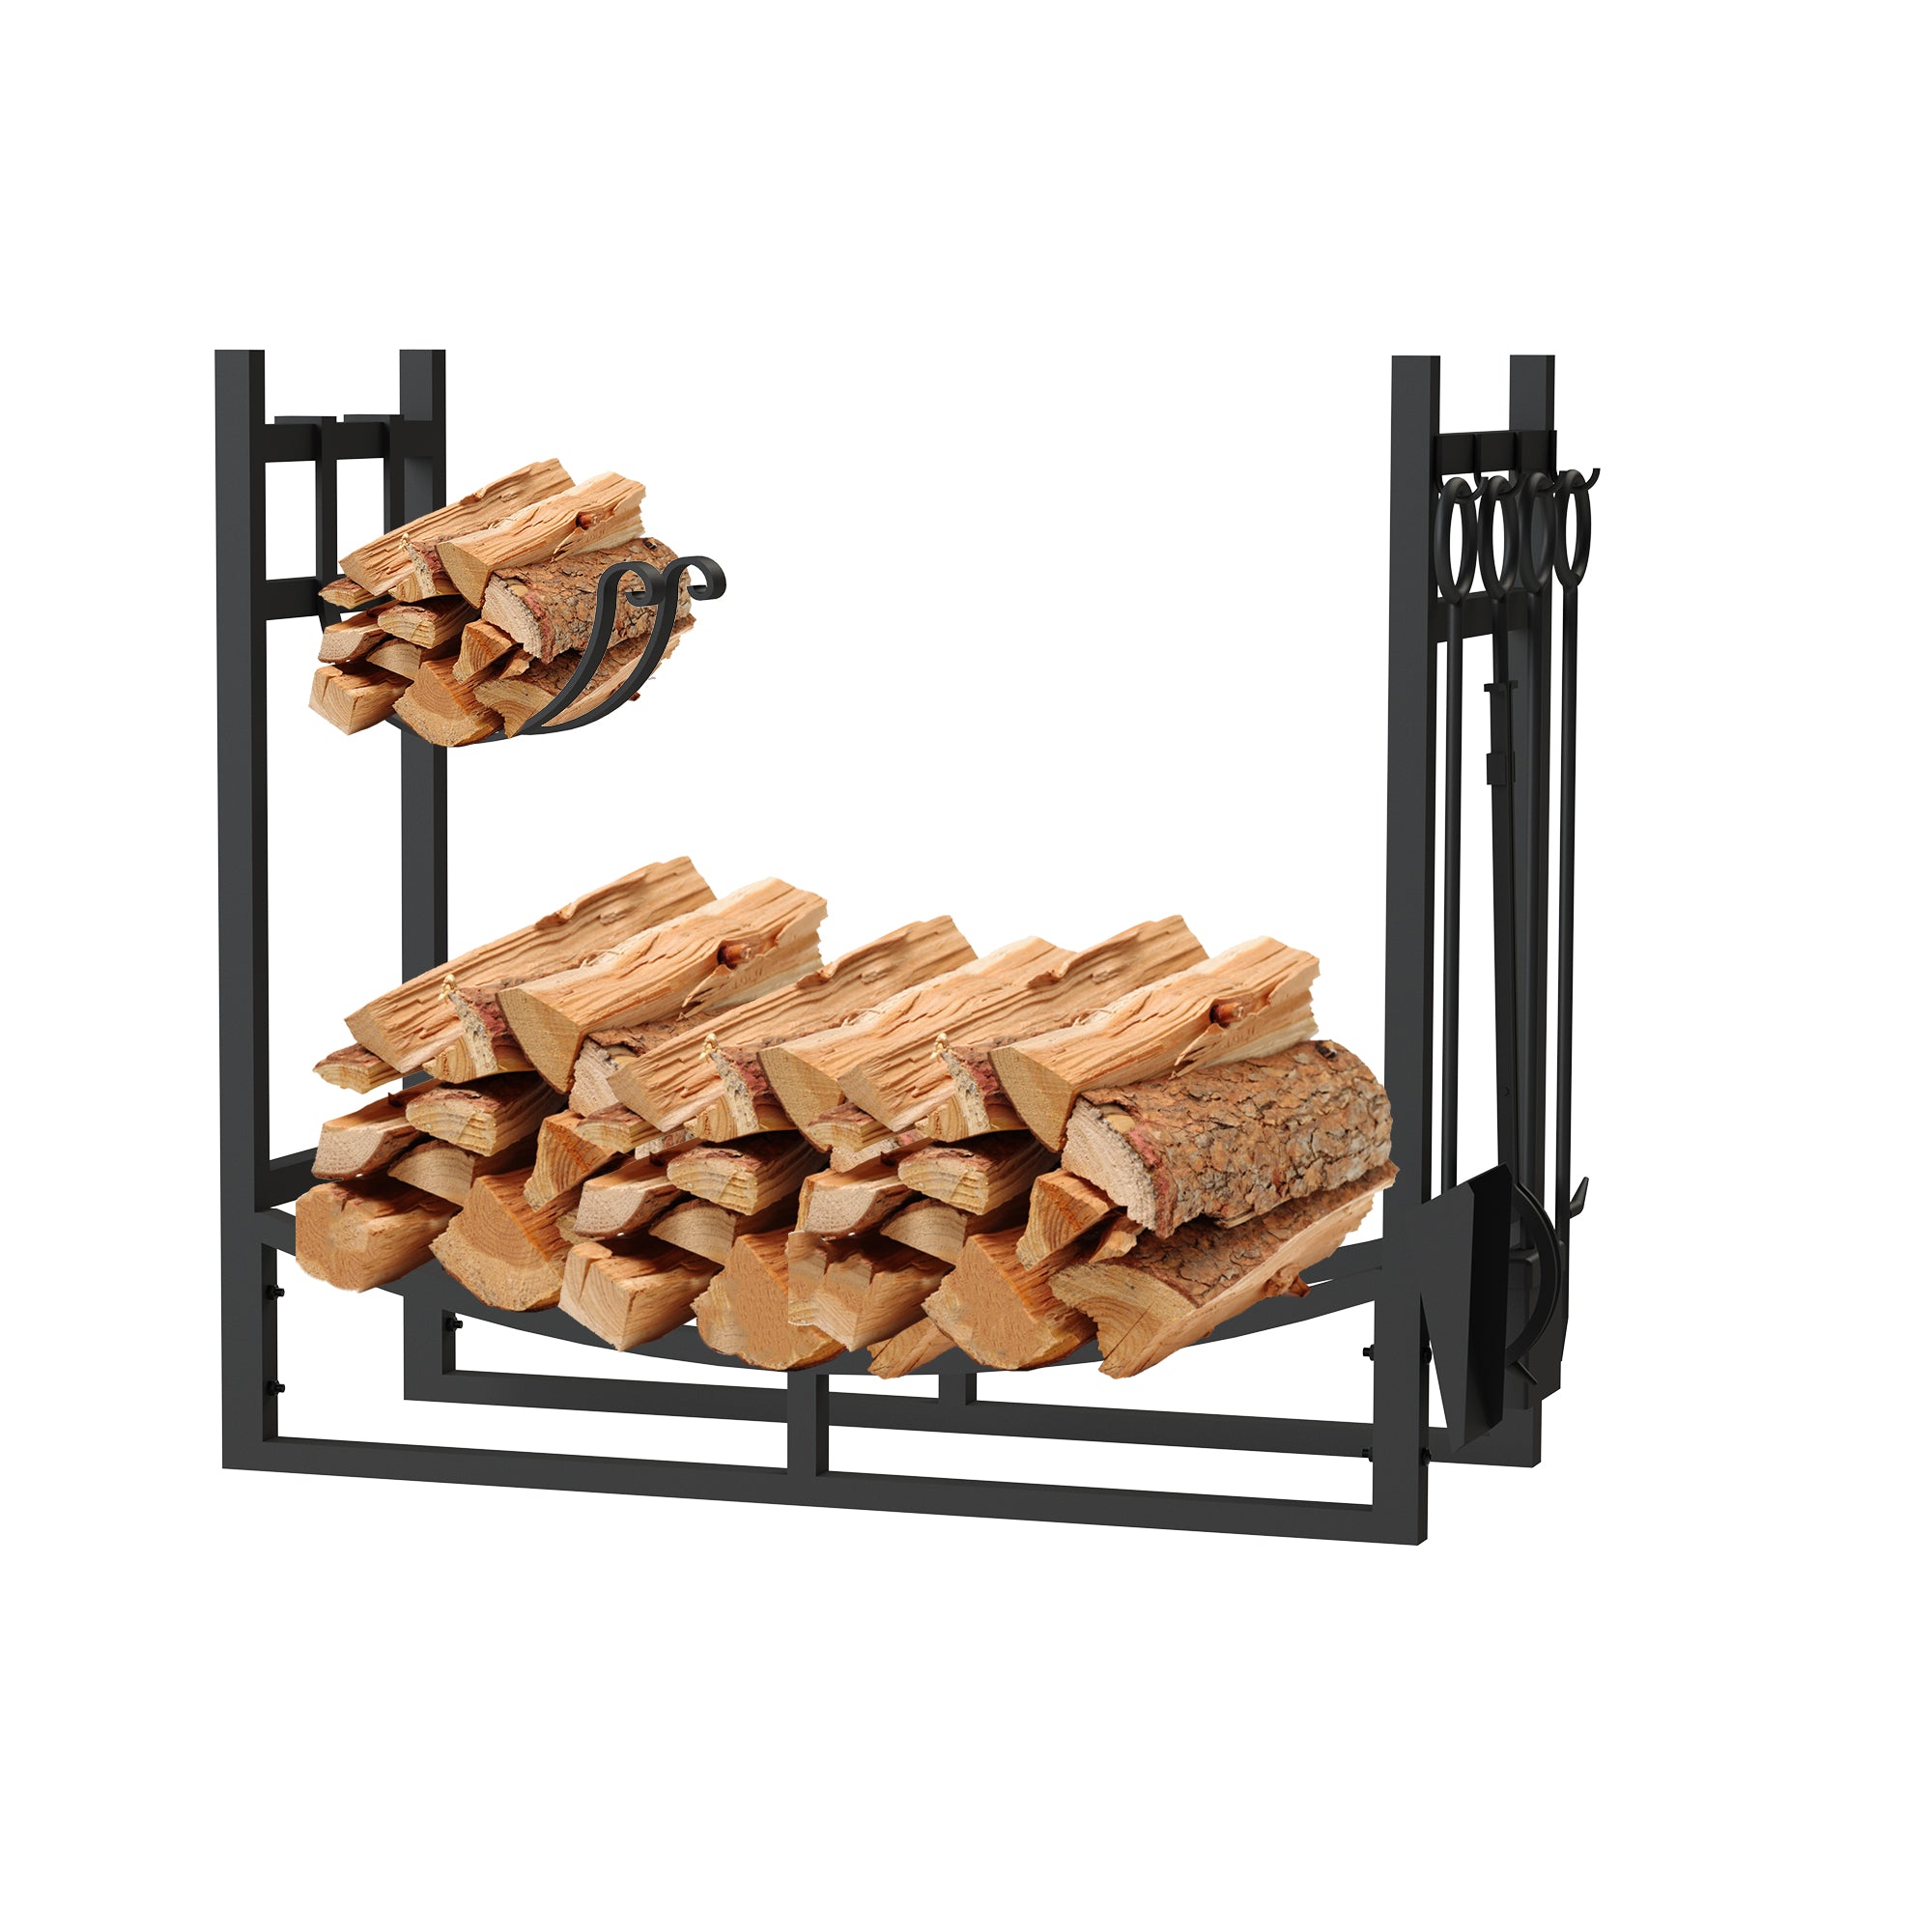 AMOS Large Wide Firewood Stand Log Rack Holder with 4 Piece Fireplace Tools Set